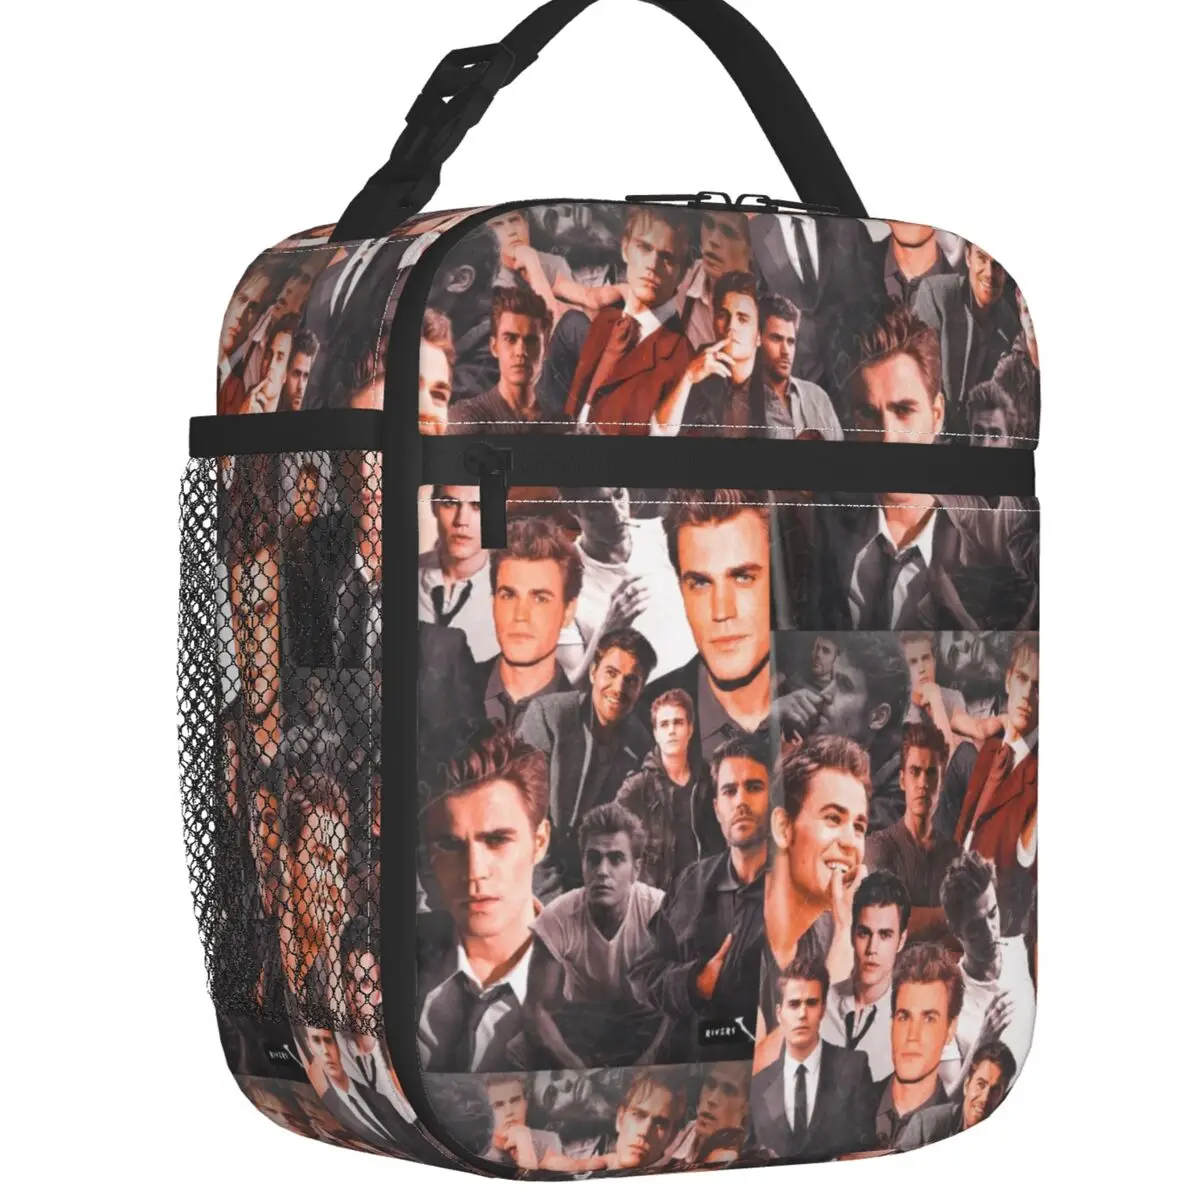 

Stefan Salvatore The Vampire Diaries TV Show Insulated Lunch Bags Work School Damon Salvatore Leakproof Cooler Thermal Lunch Box